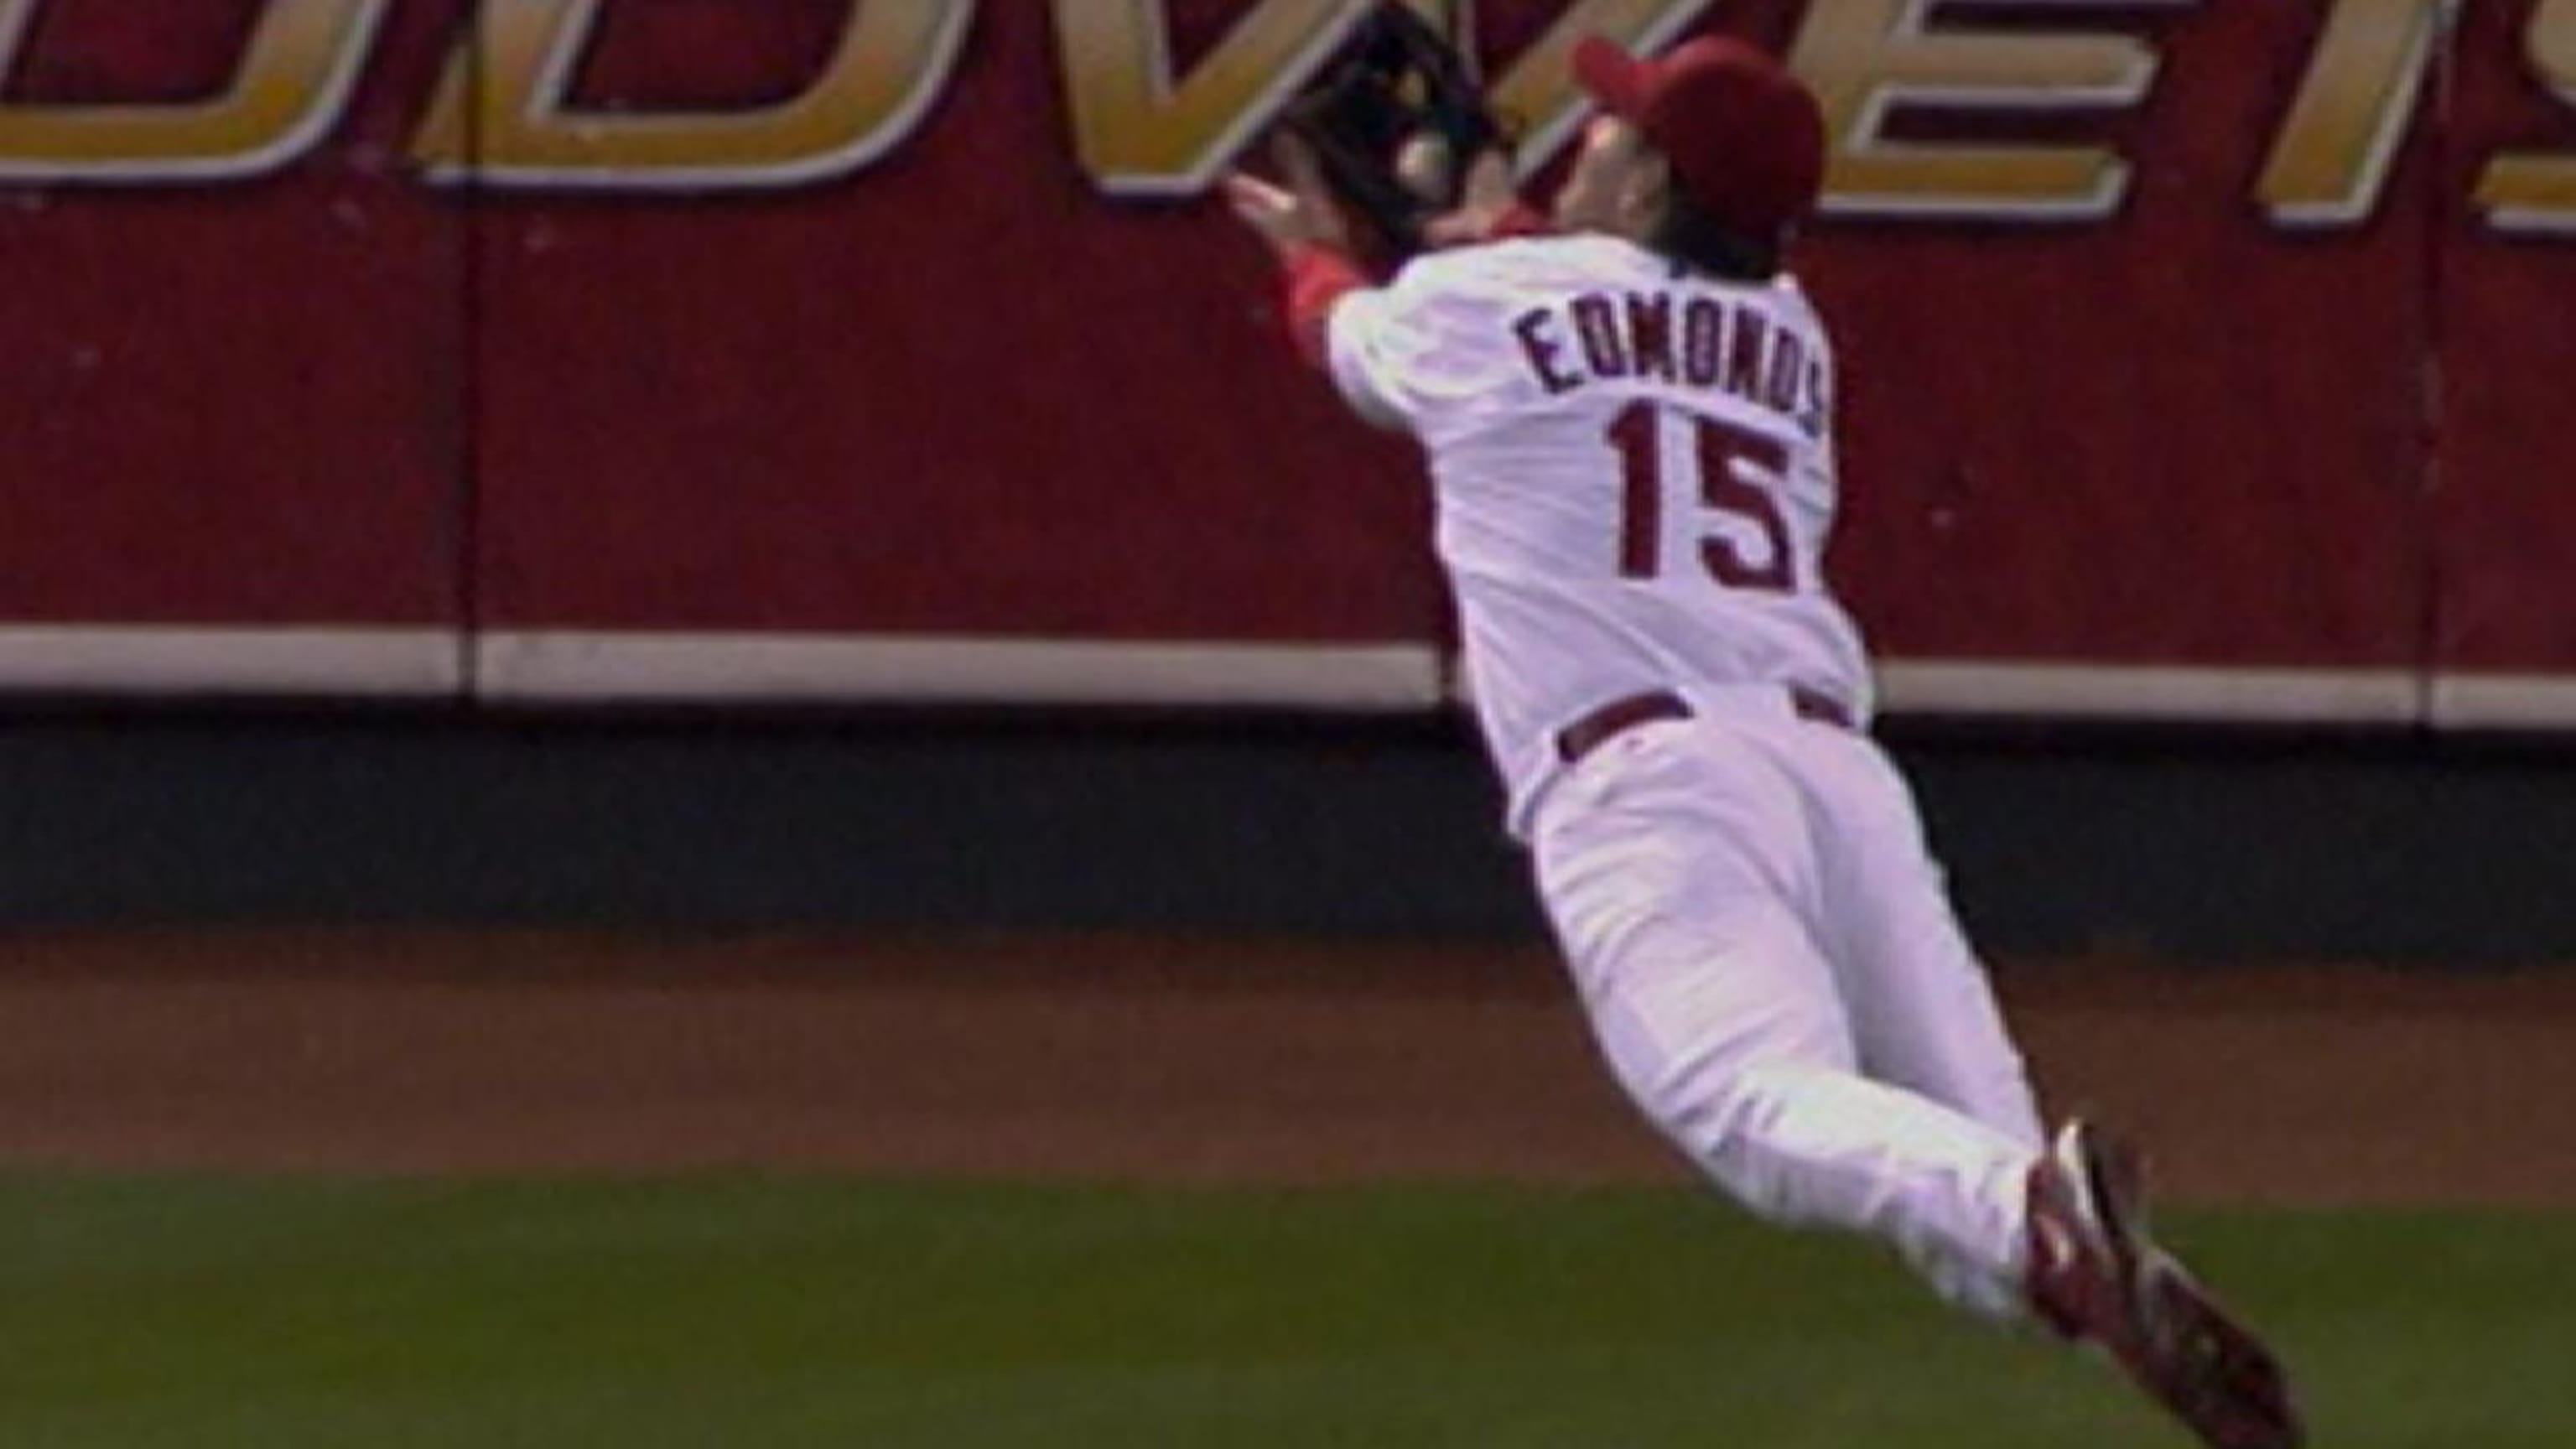 It's been seven years since Jim Edmonds retired, so let's revisit